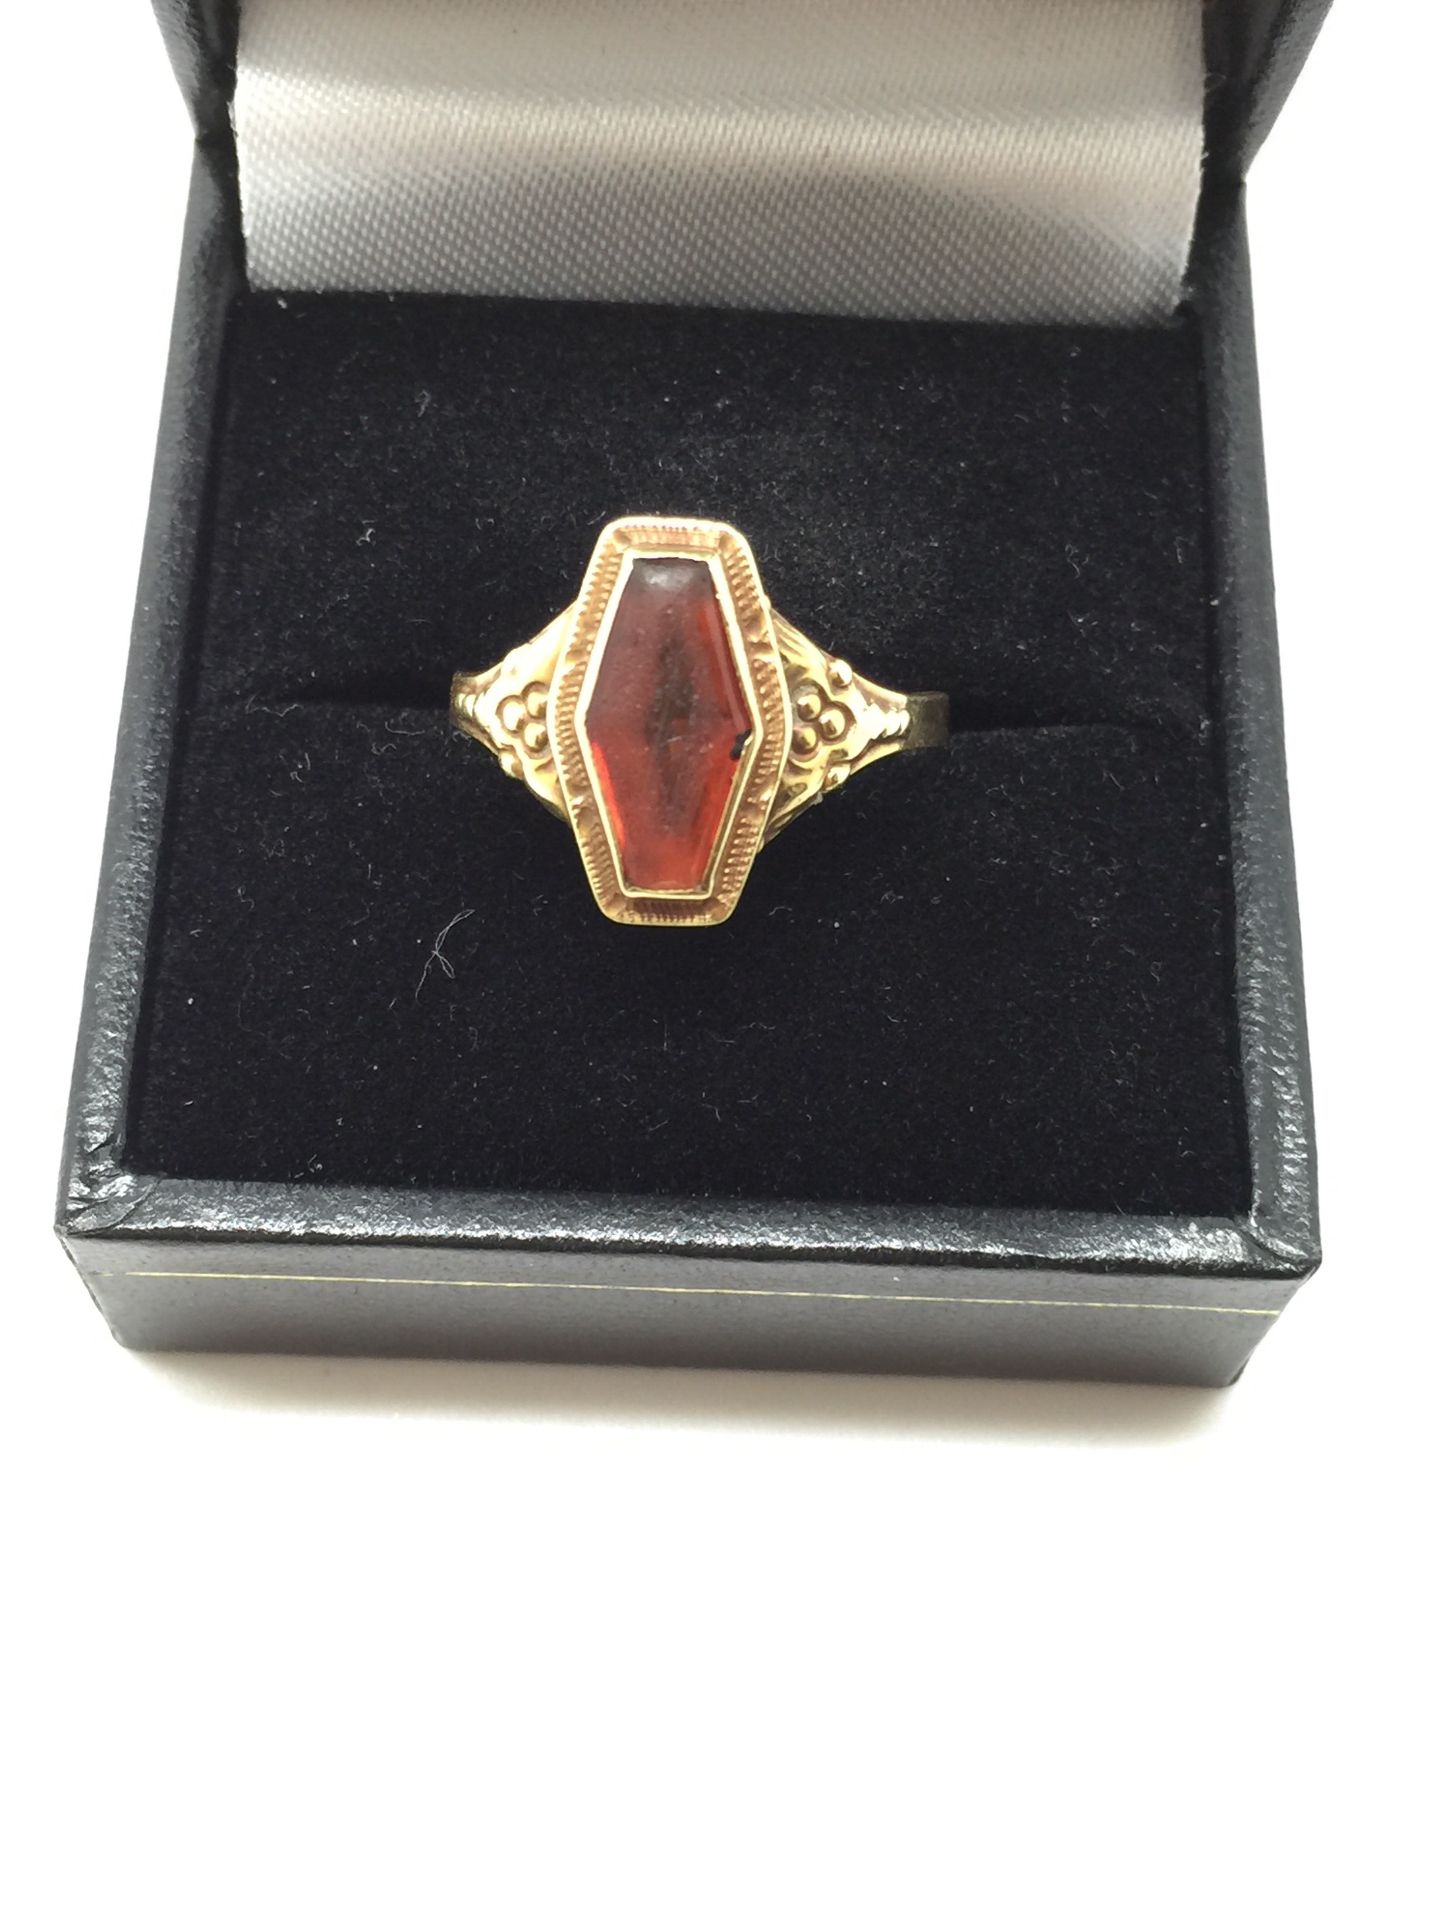 ANTIQUE 14ct GOLD RING SET WITH UNUSUAL STONE